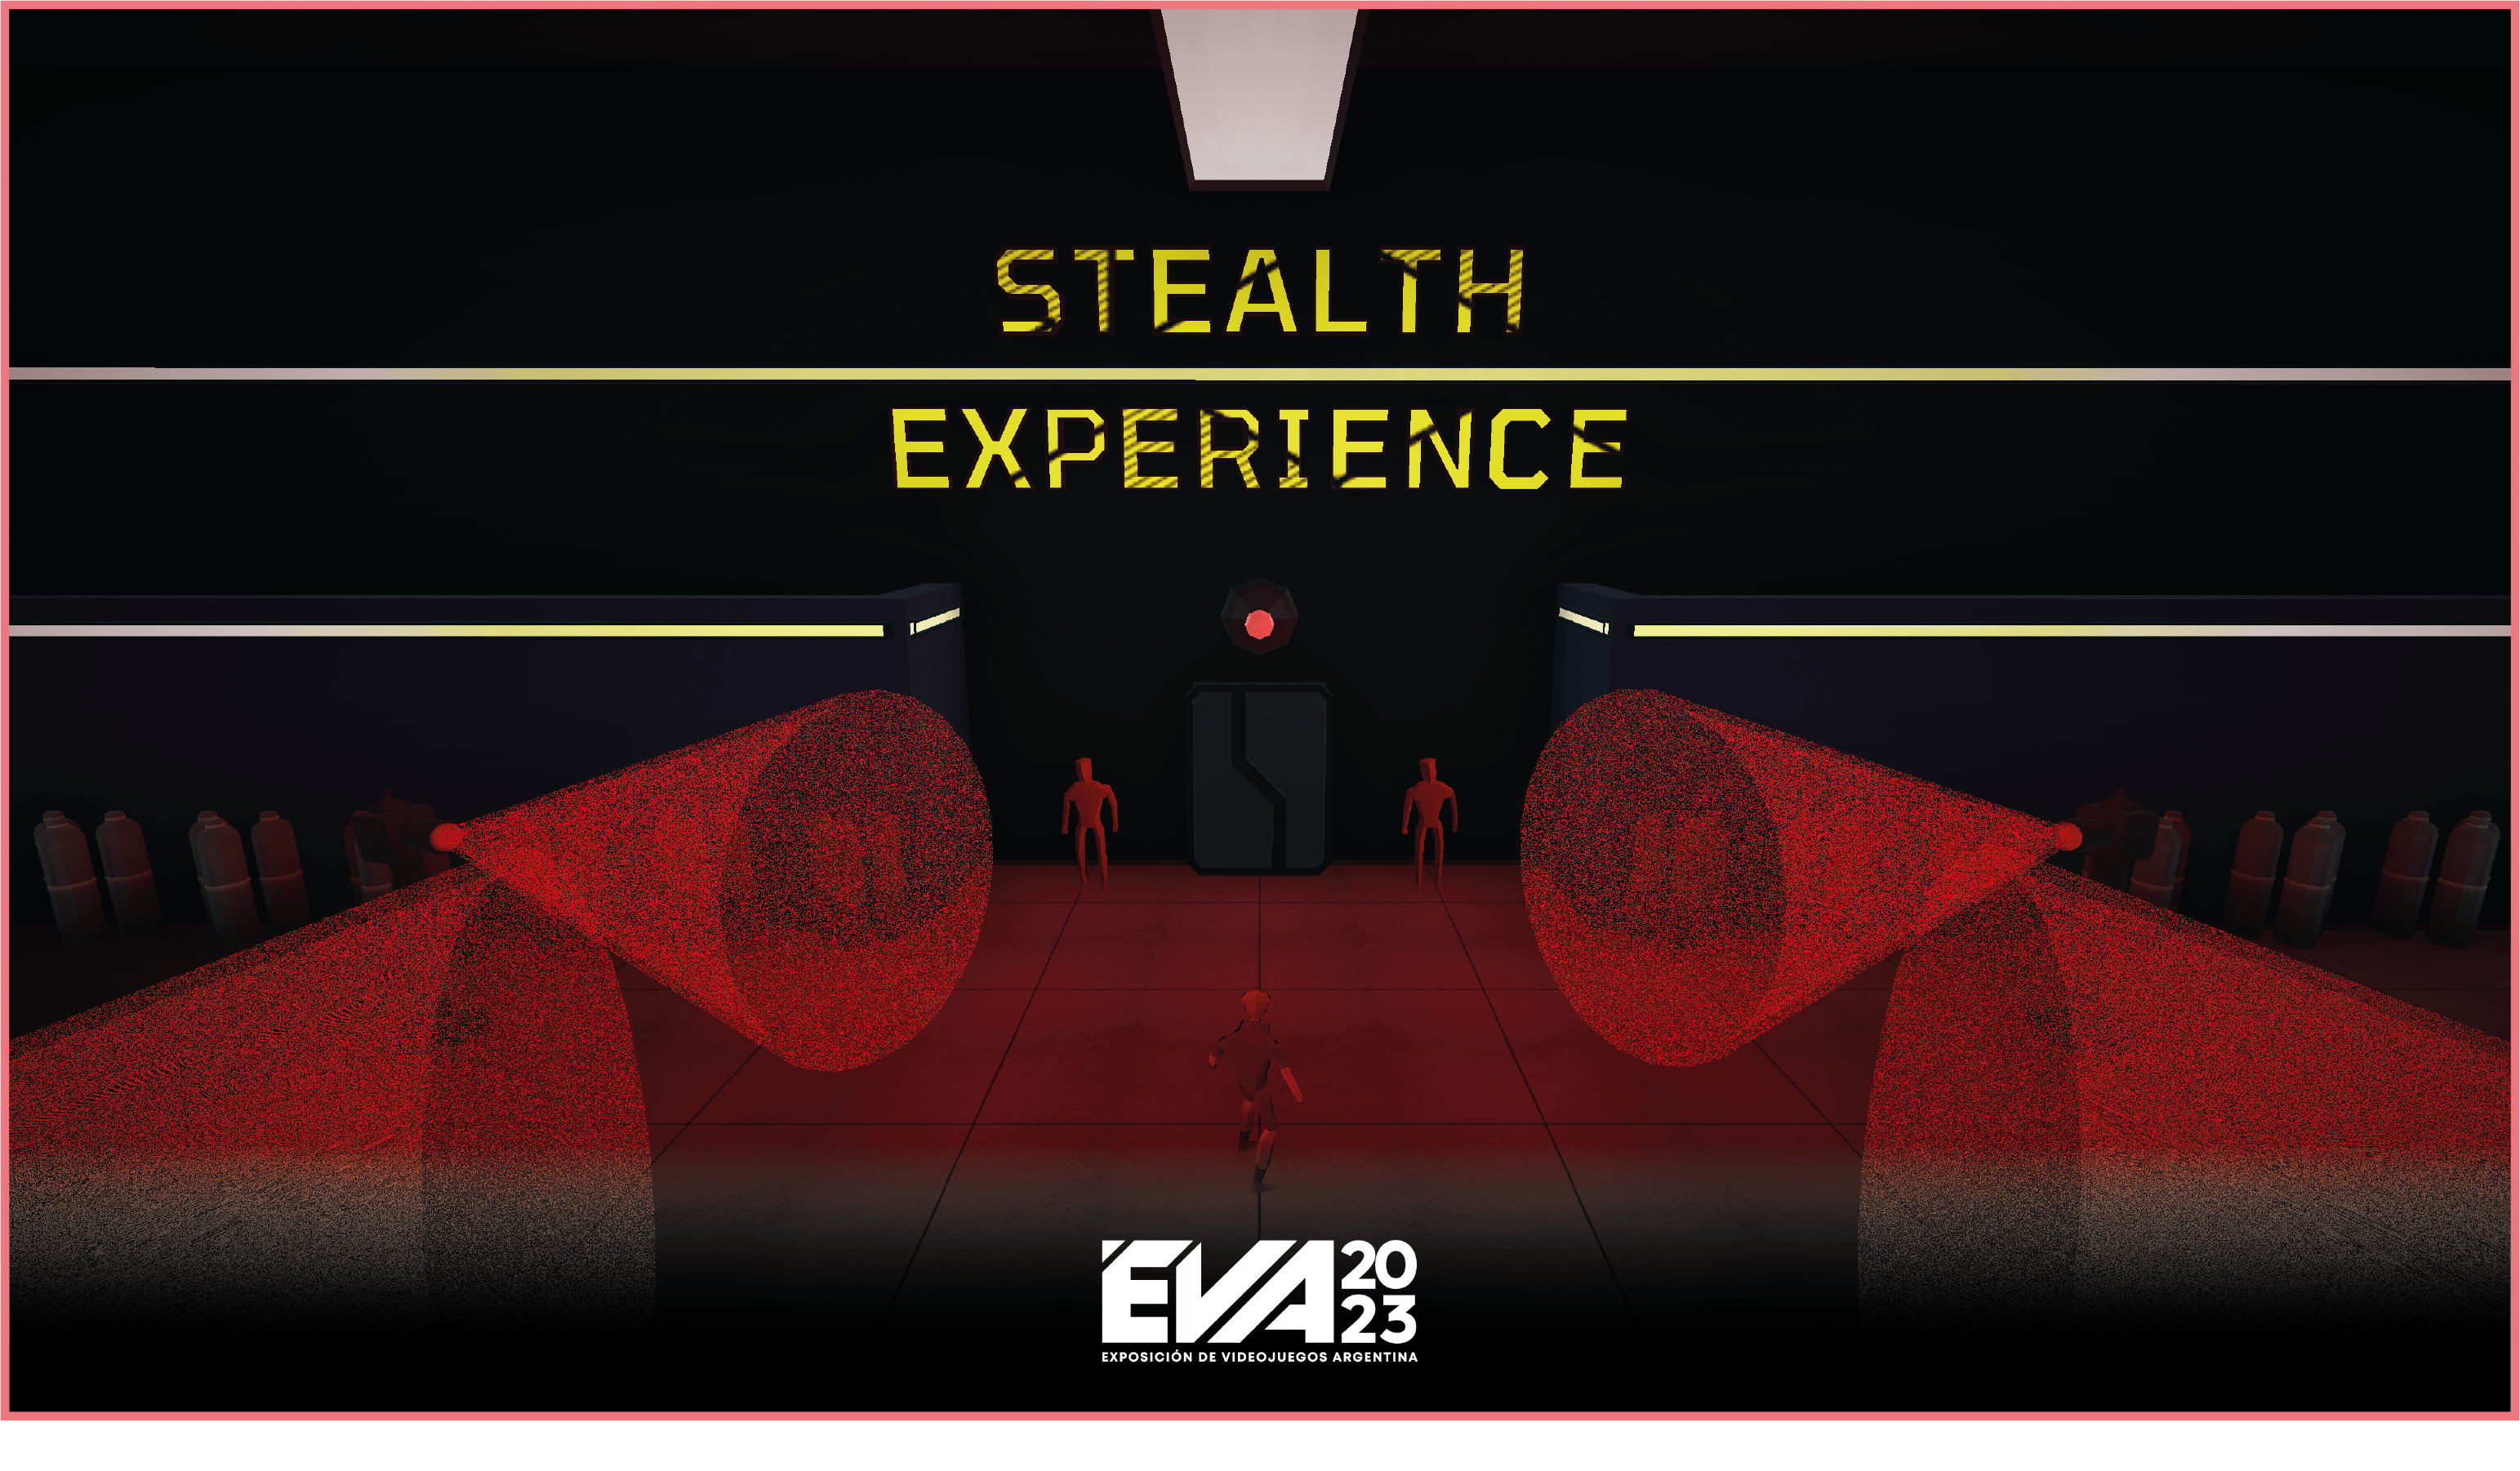 Stealth Experience